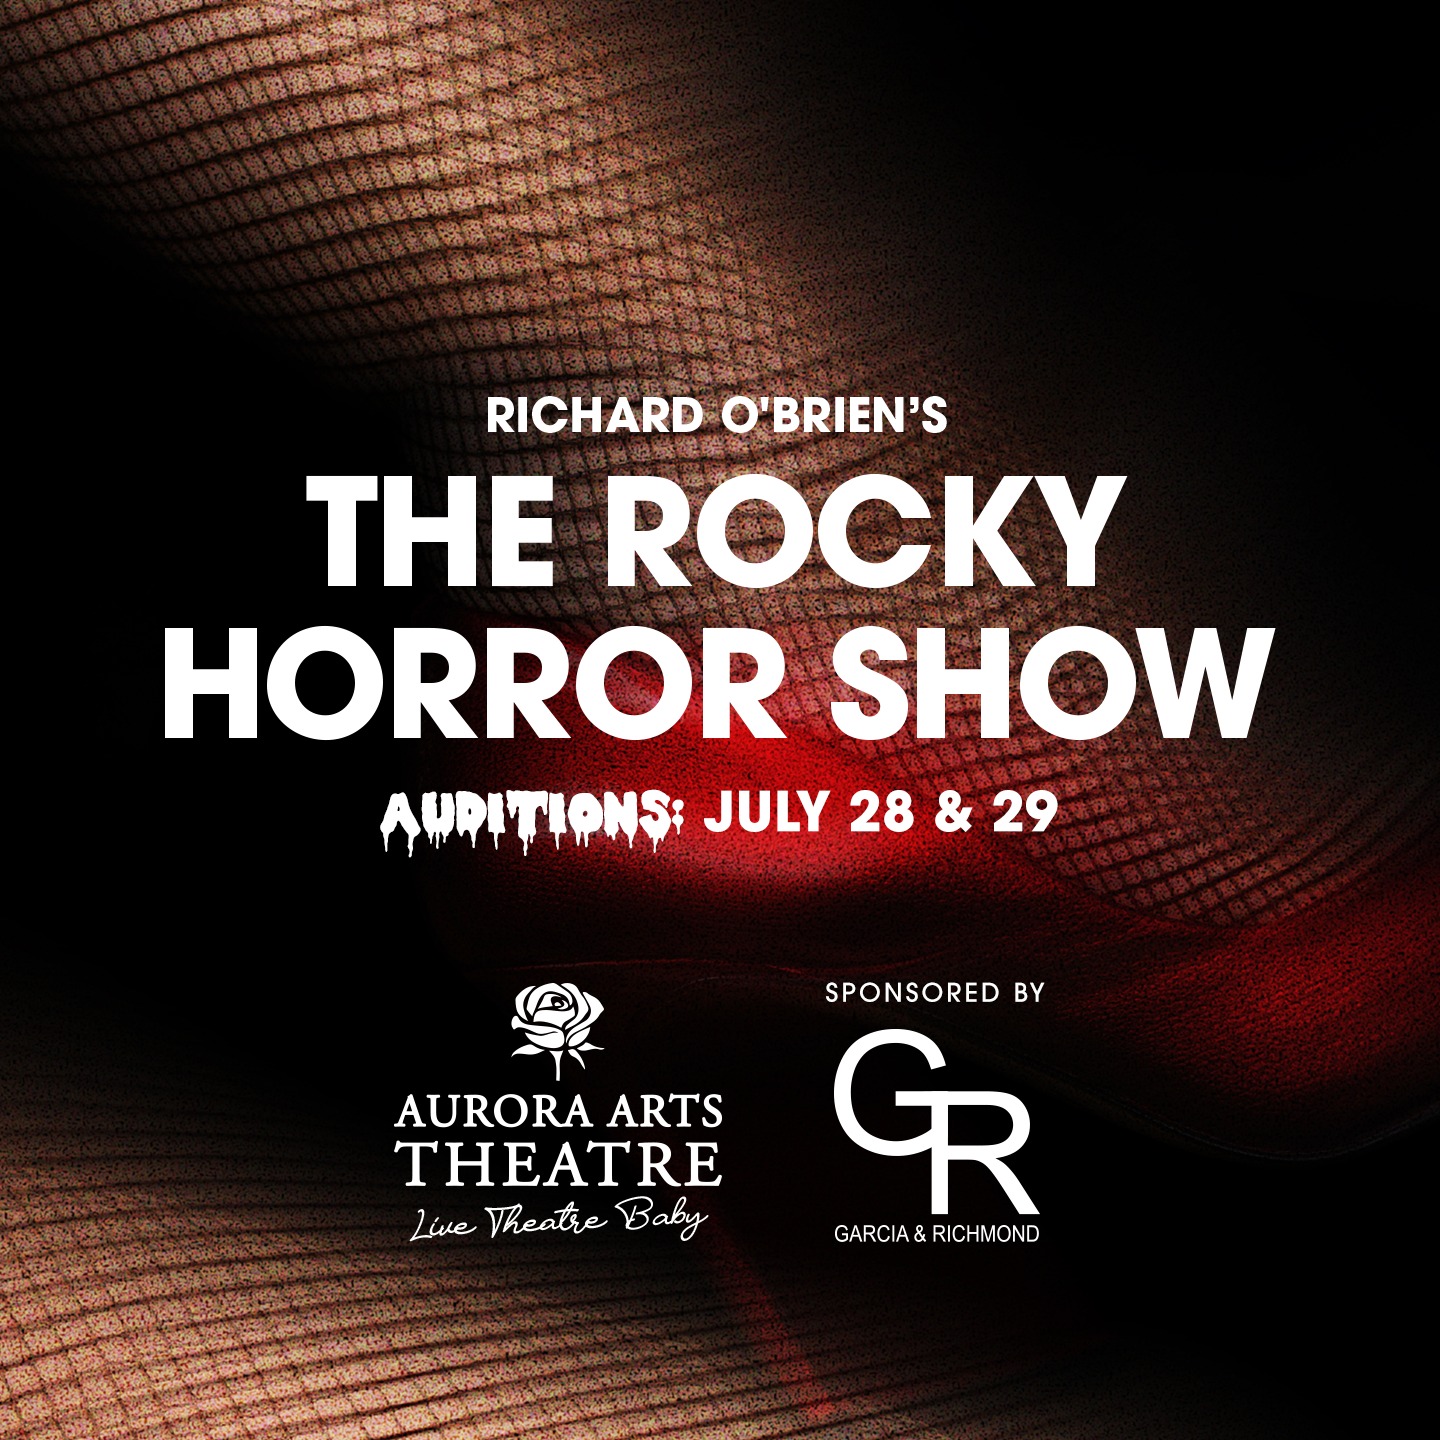 Auditions for The Rocky Horror Show, by Aurora Arts Theatre, Corpus Christi